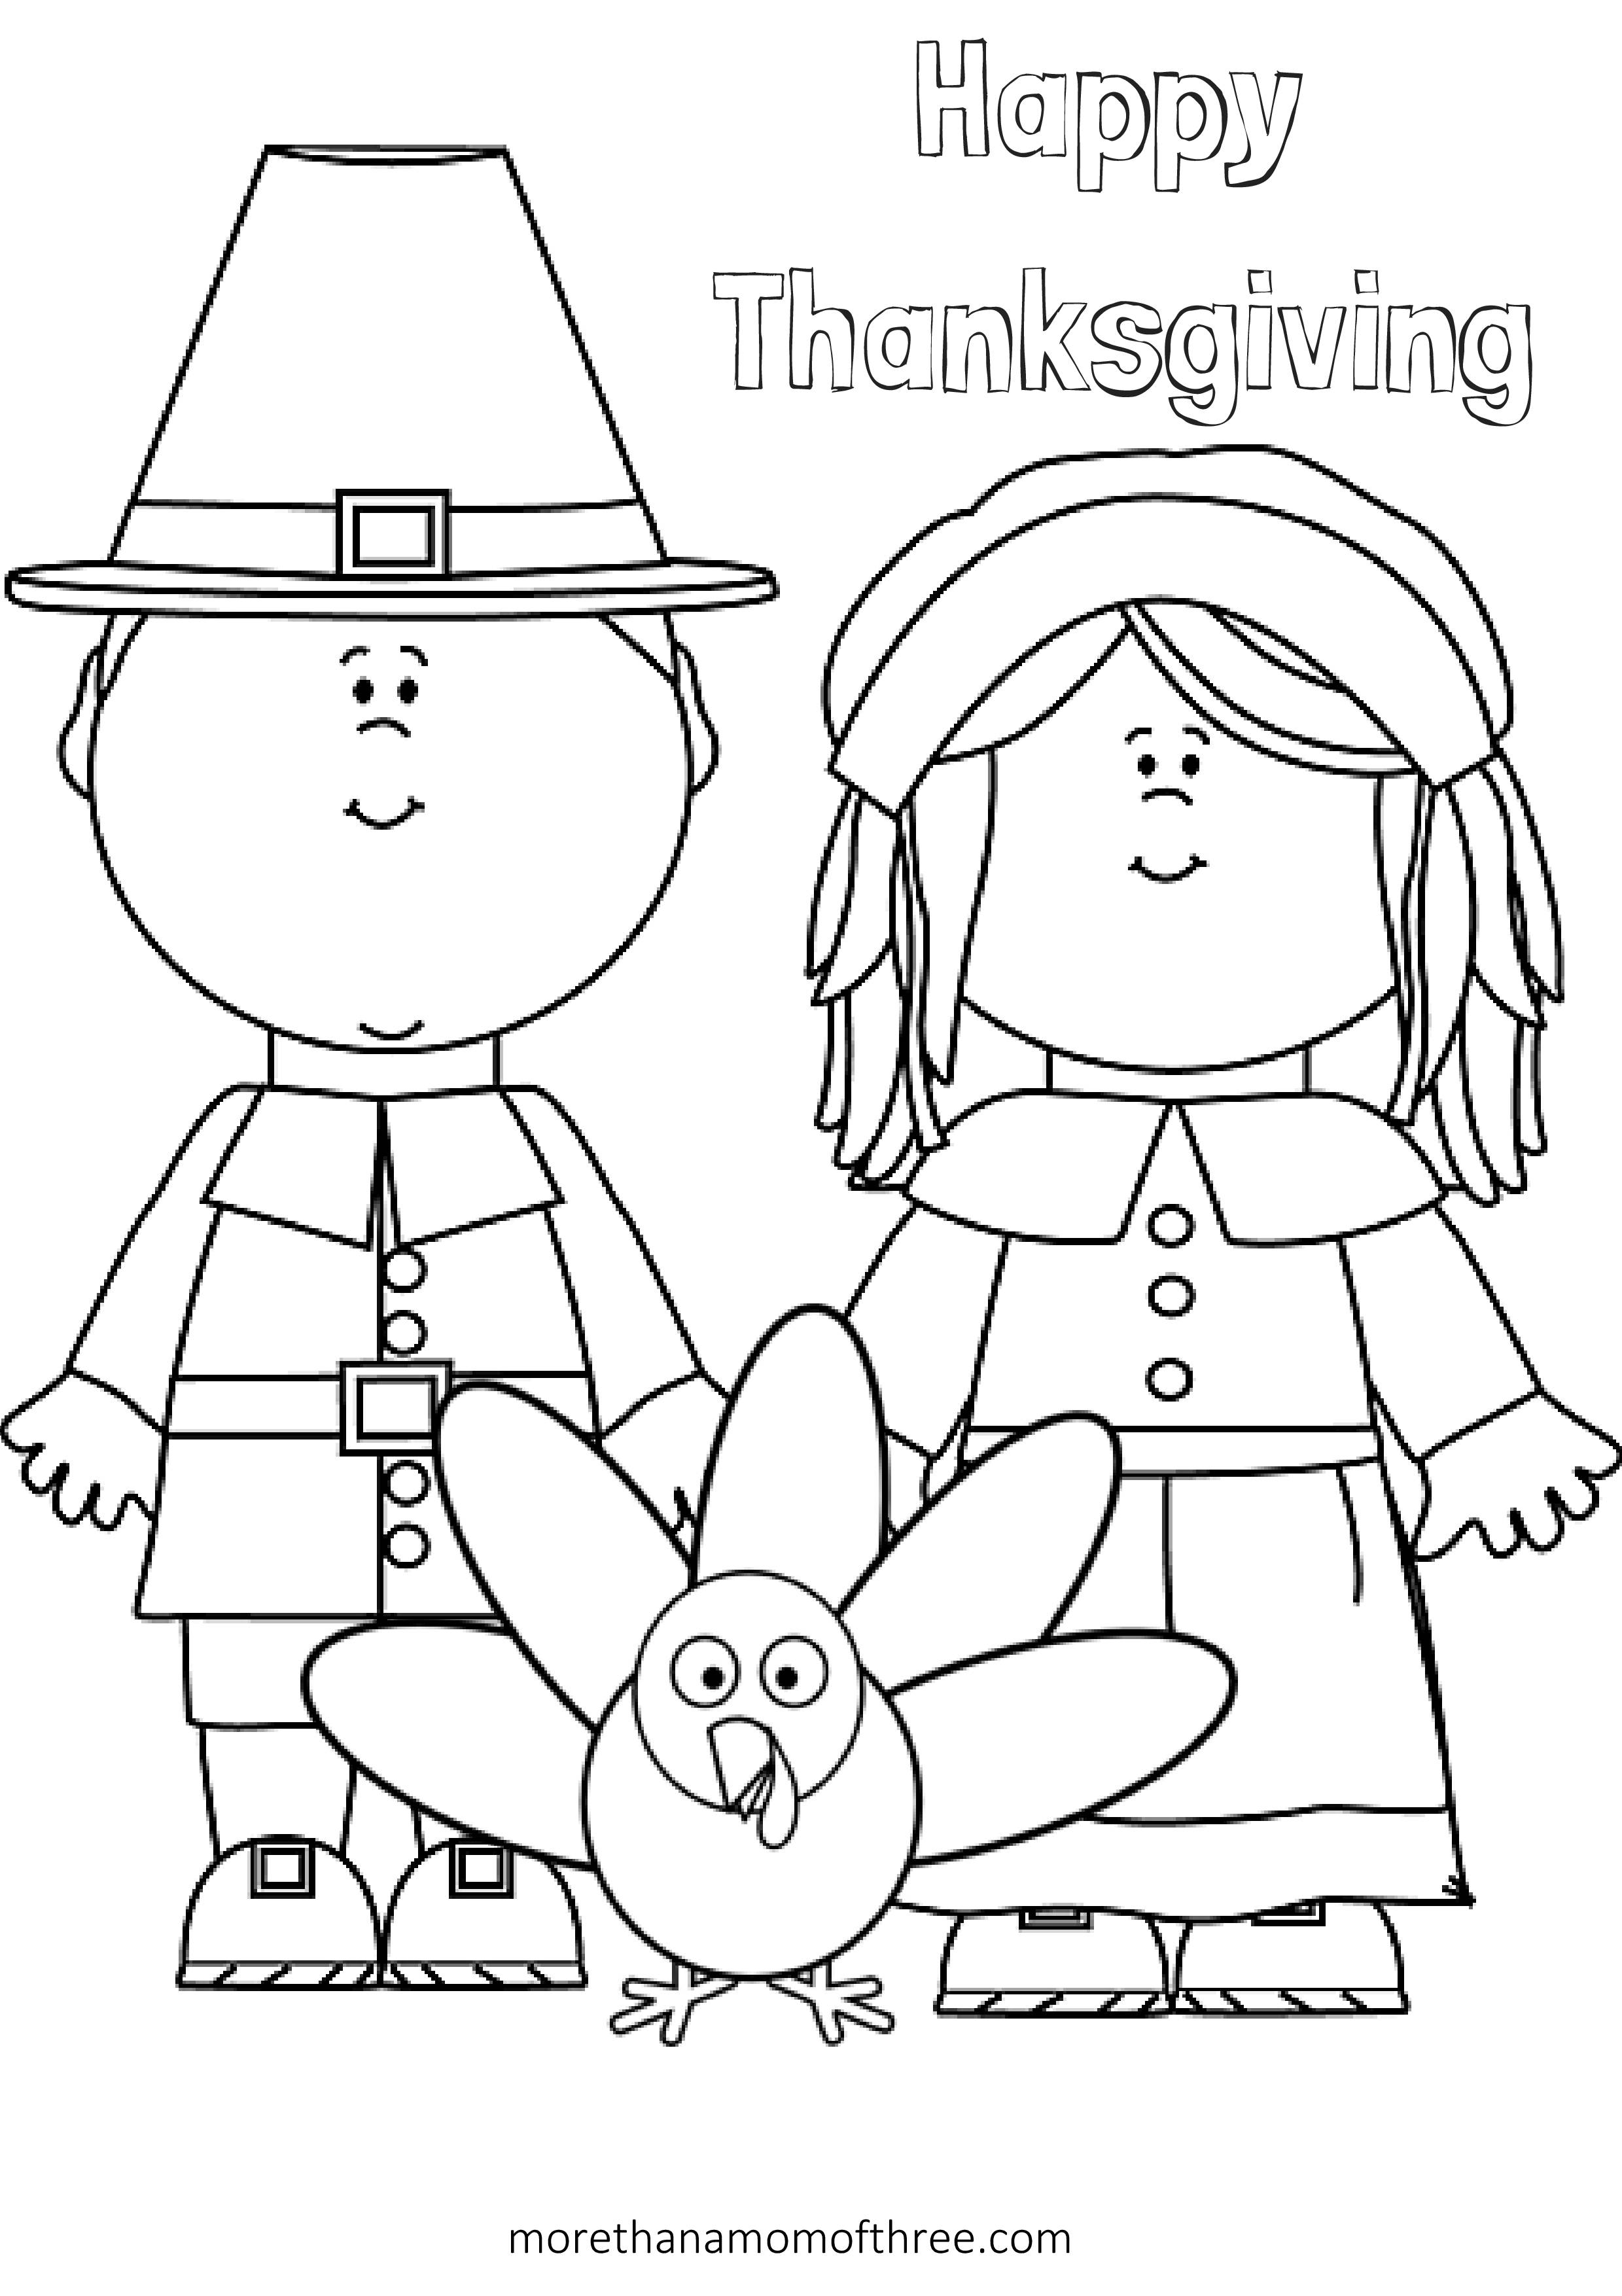 coloring-pages-for-thanksgiving-printable